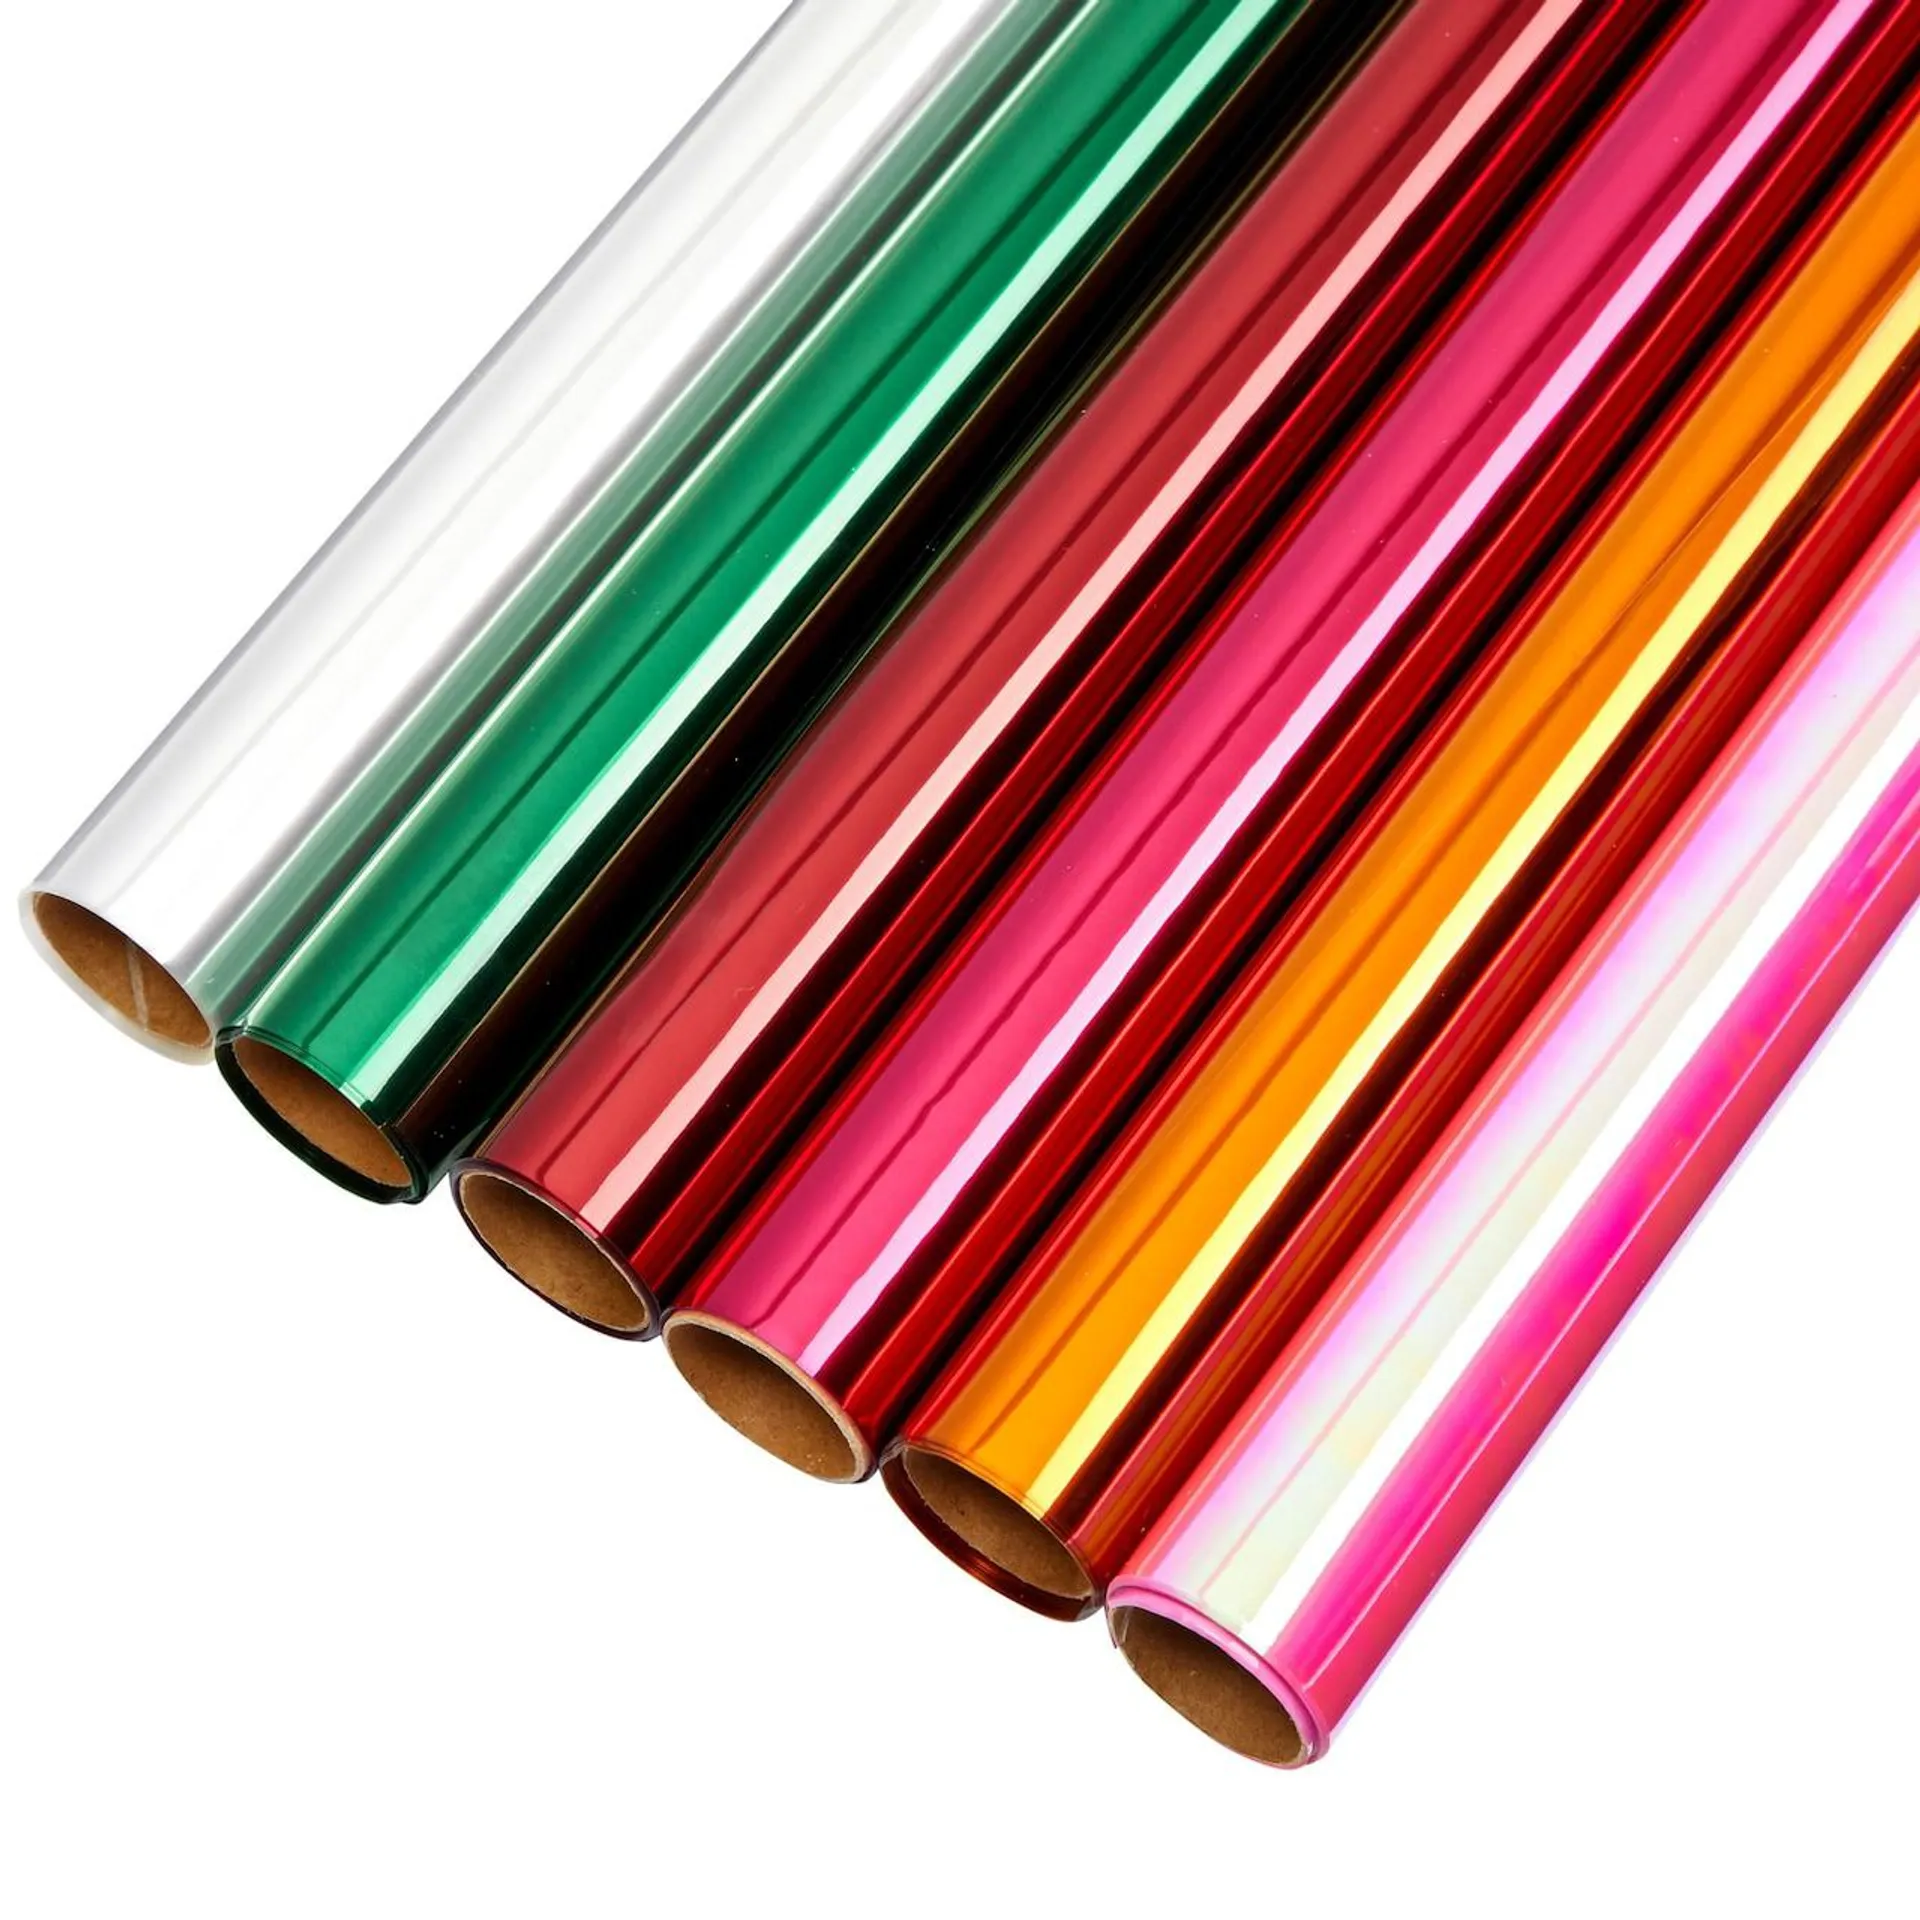 6 Rolls Transparent Colored Cellophane Wrap for Gift Wrapping, 6 Colors (17 Inches x 10 Feet)